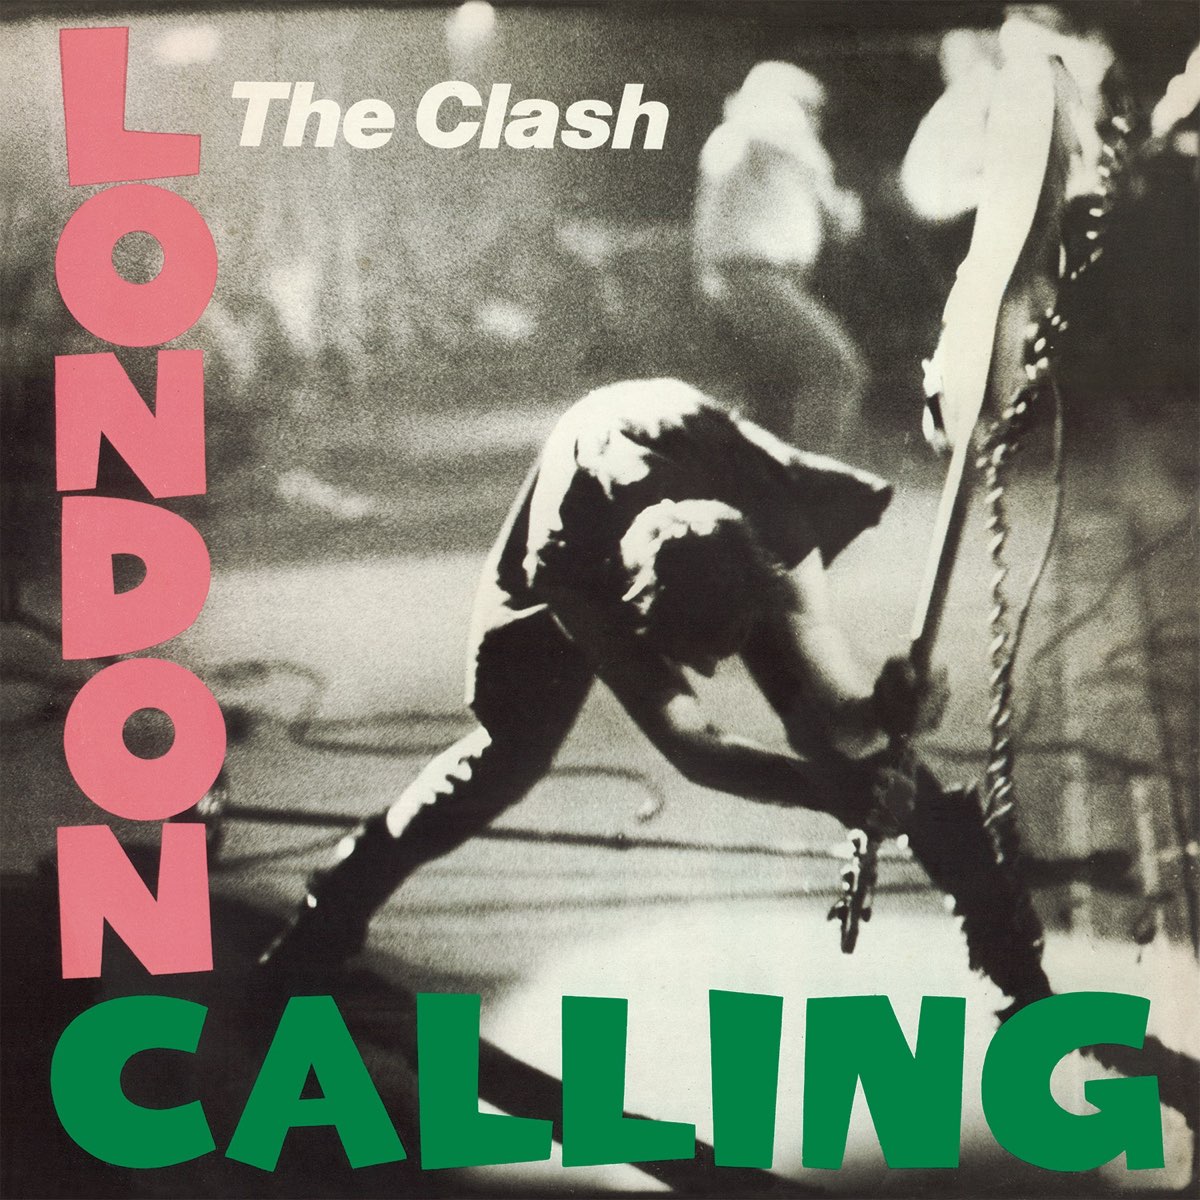 "London Calling" by The Clash album cover